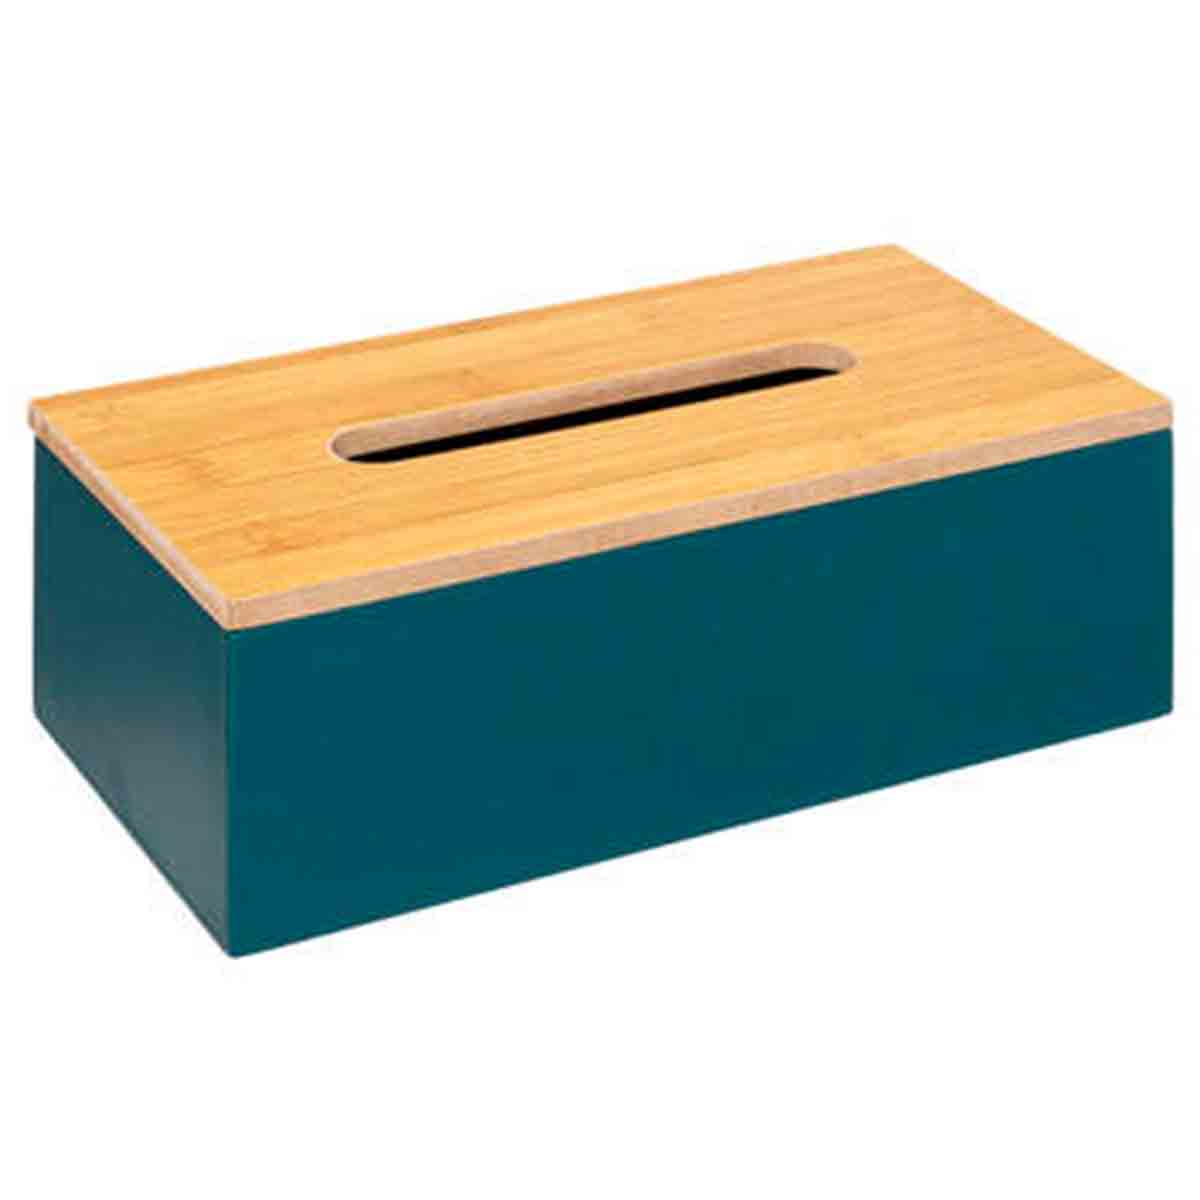 5Five Modern Tissue Box With Bamboo Lid - Teal